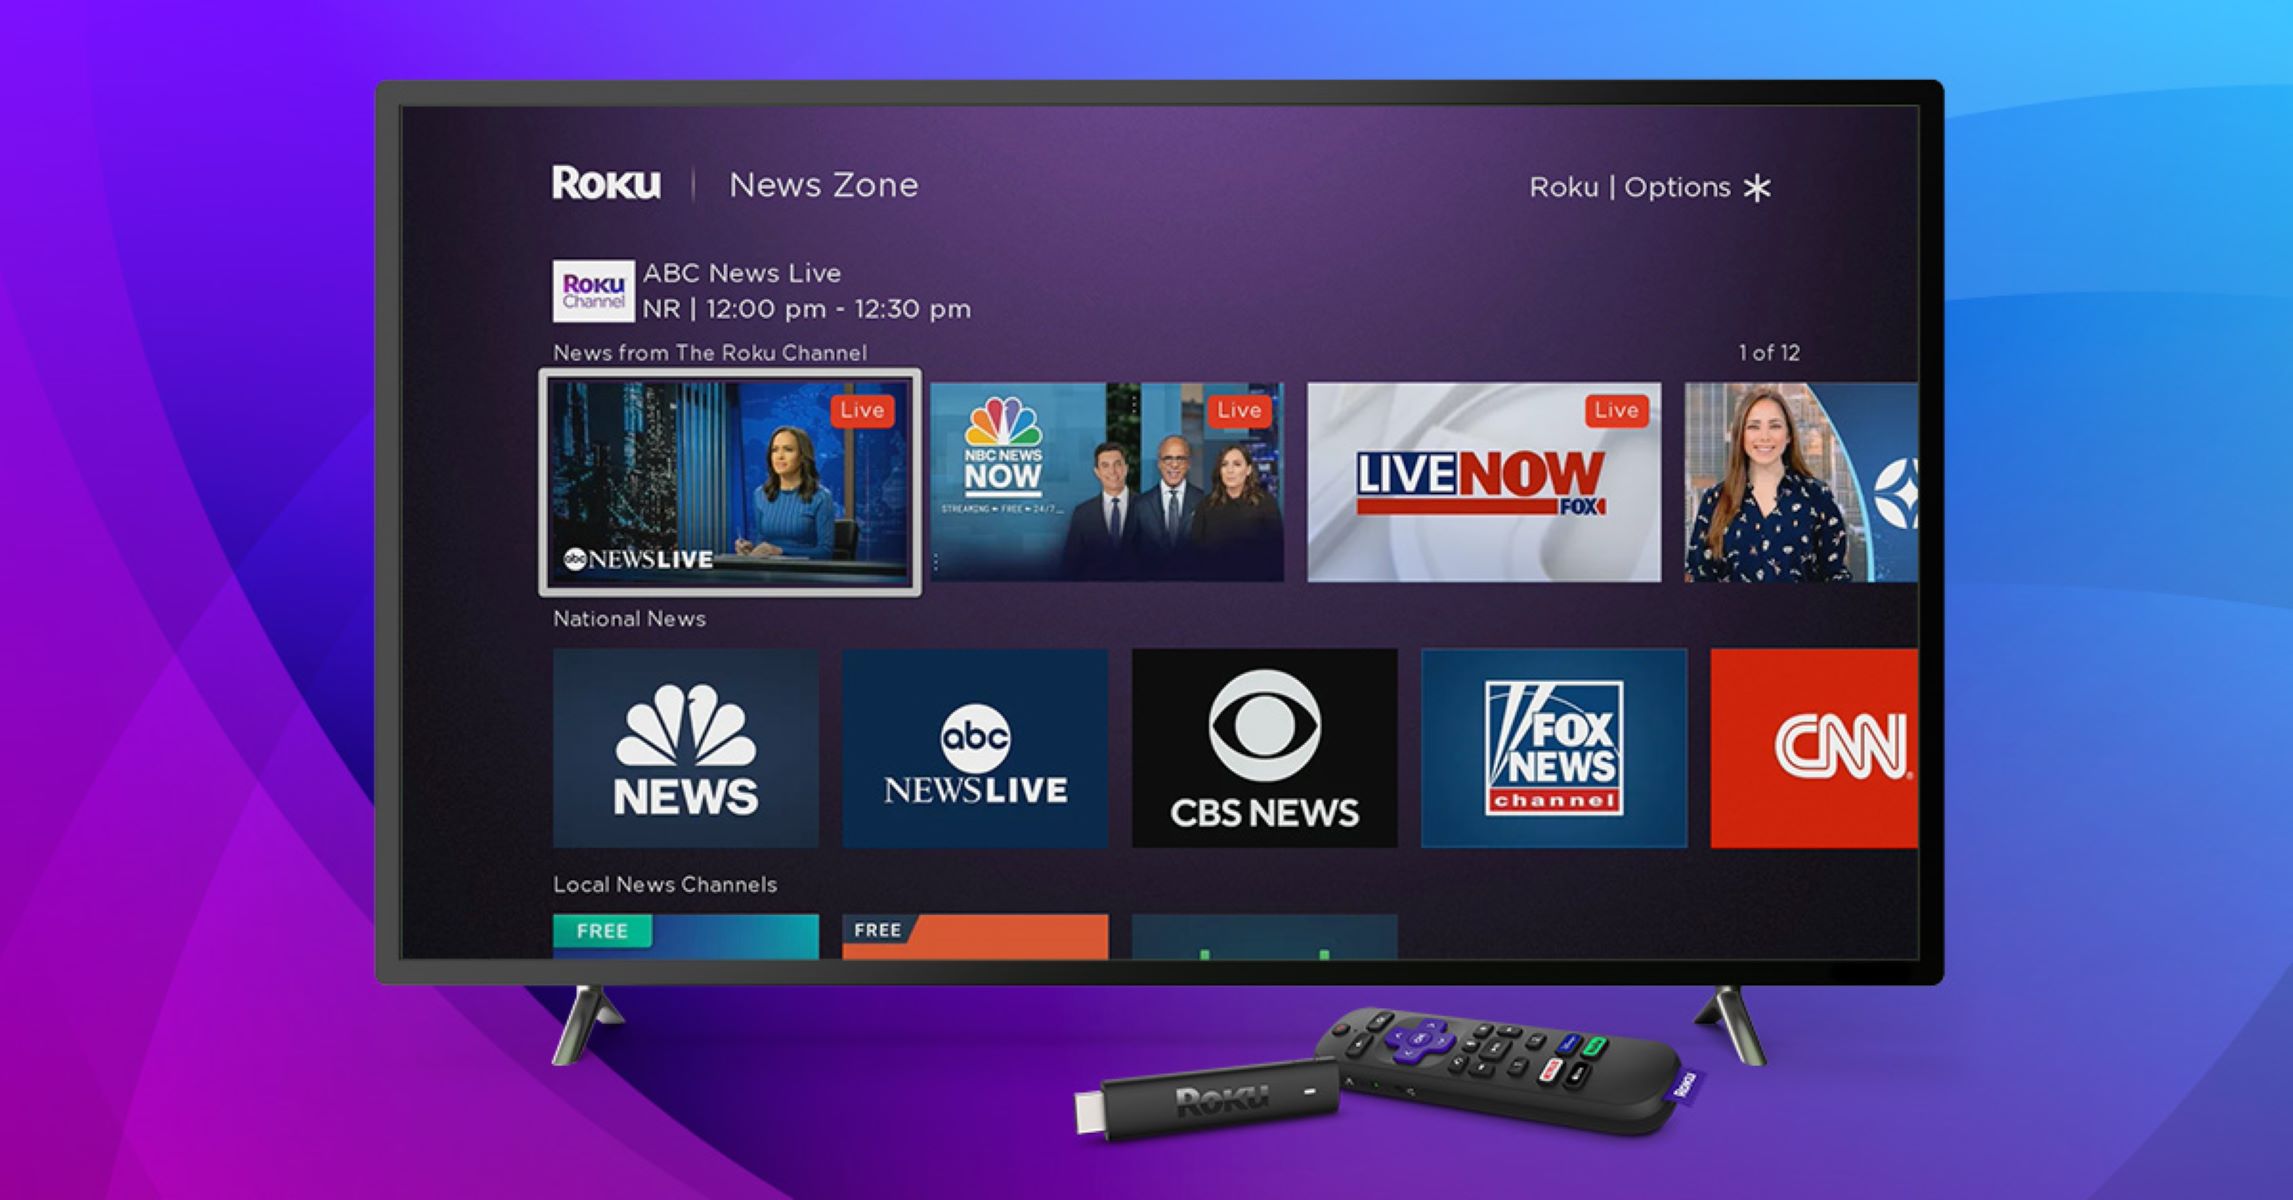 How To Watch Live TV On Roku For Free